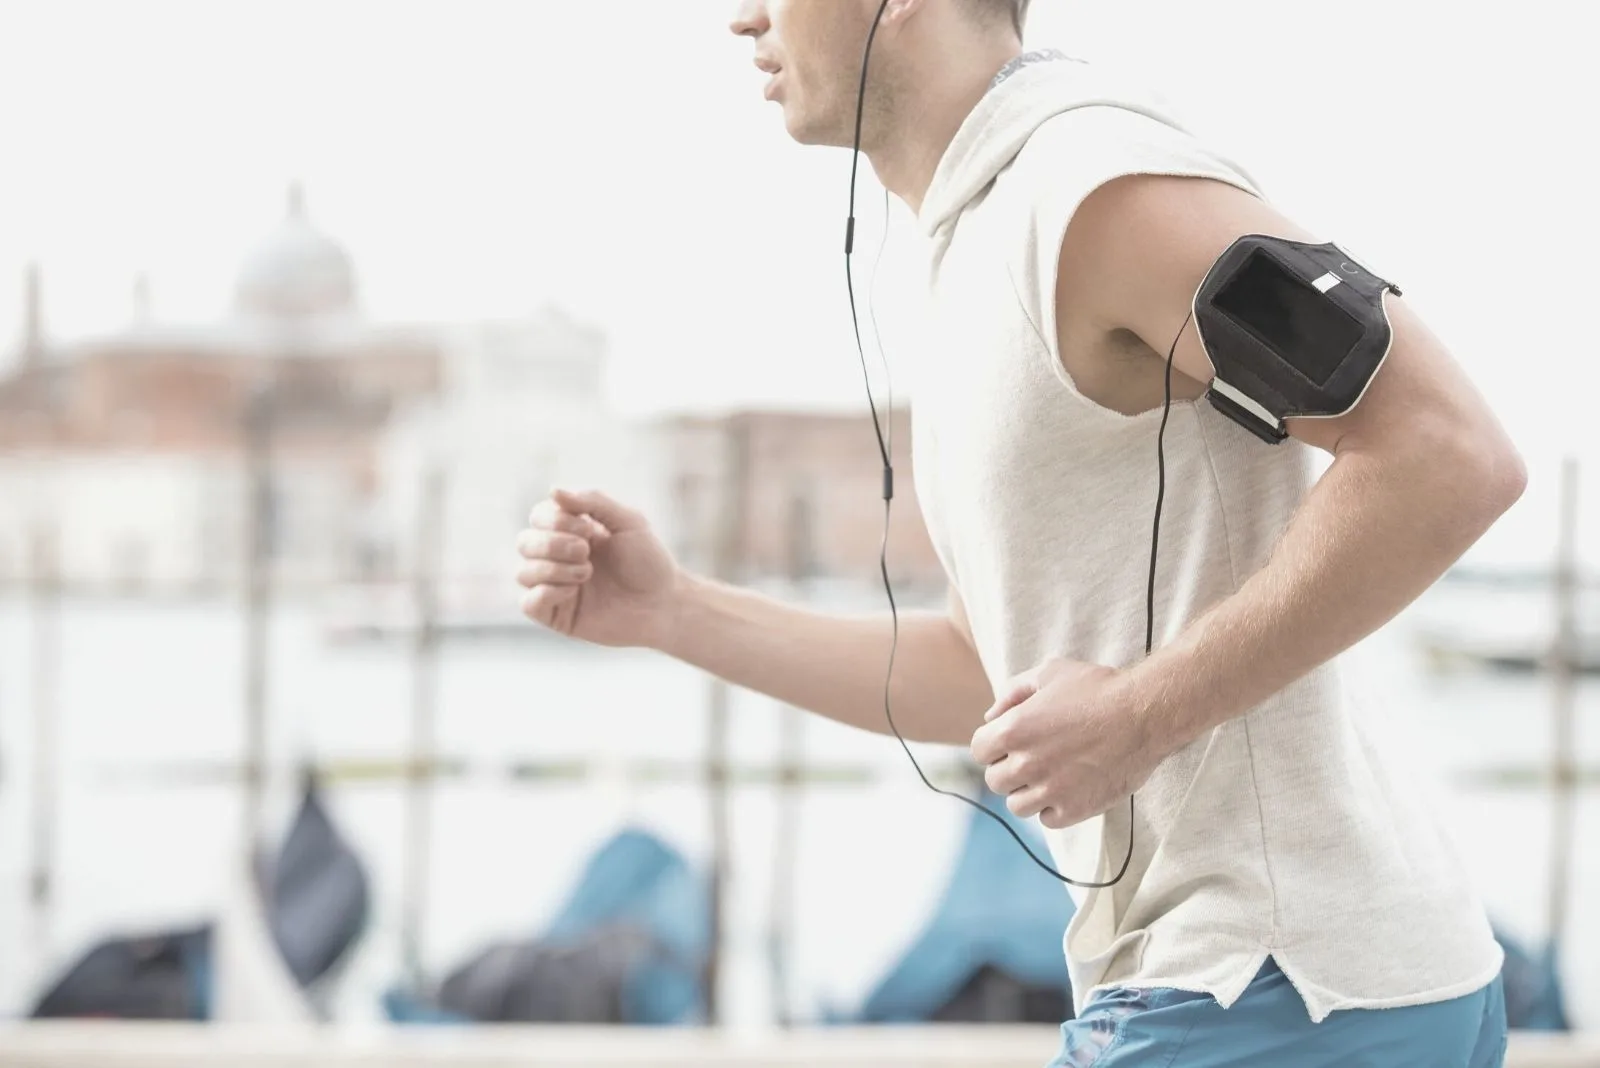 man jogging outside with headphone and arm band in cropped image